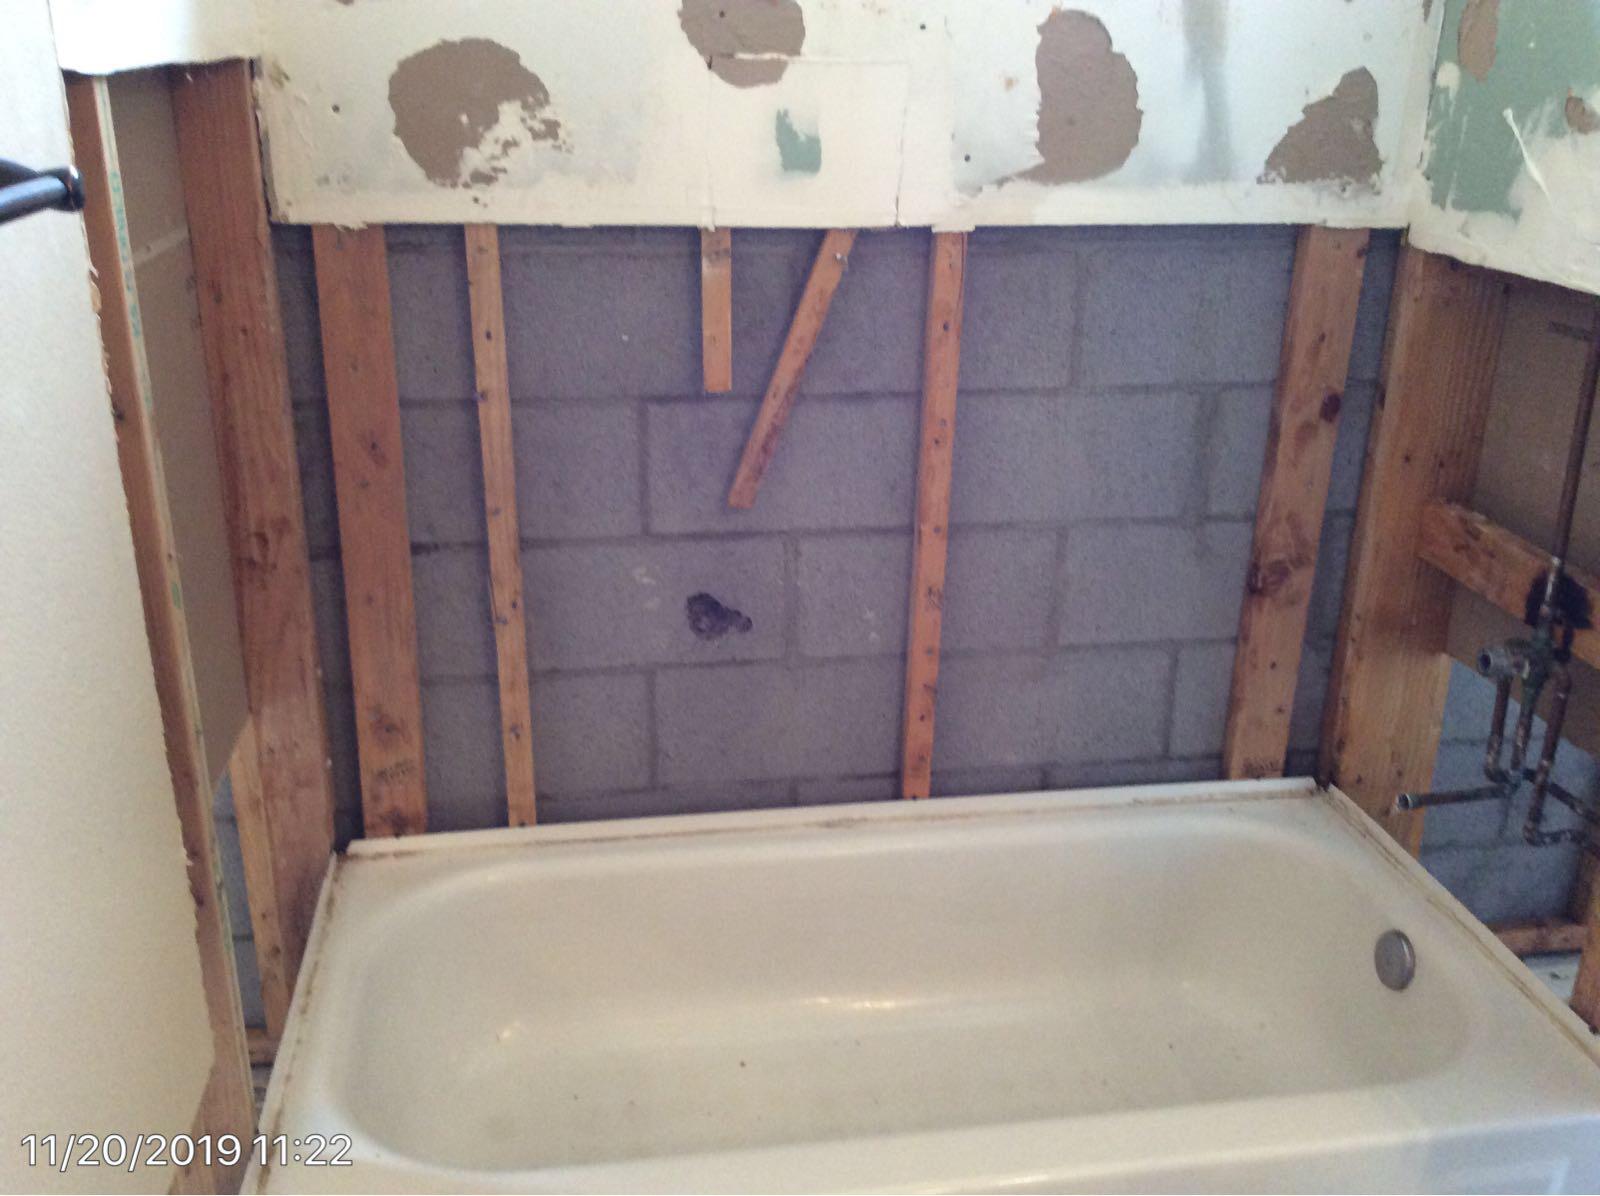 Water can seep into the walls behind your tub and shower.